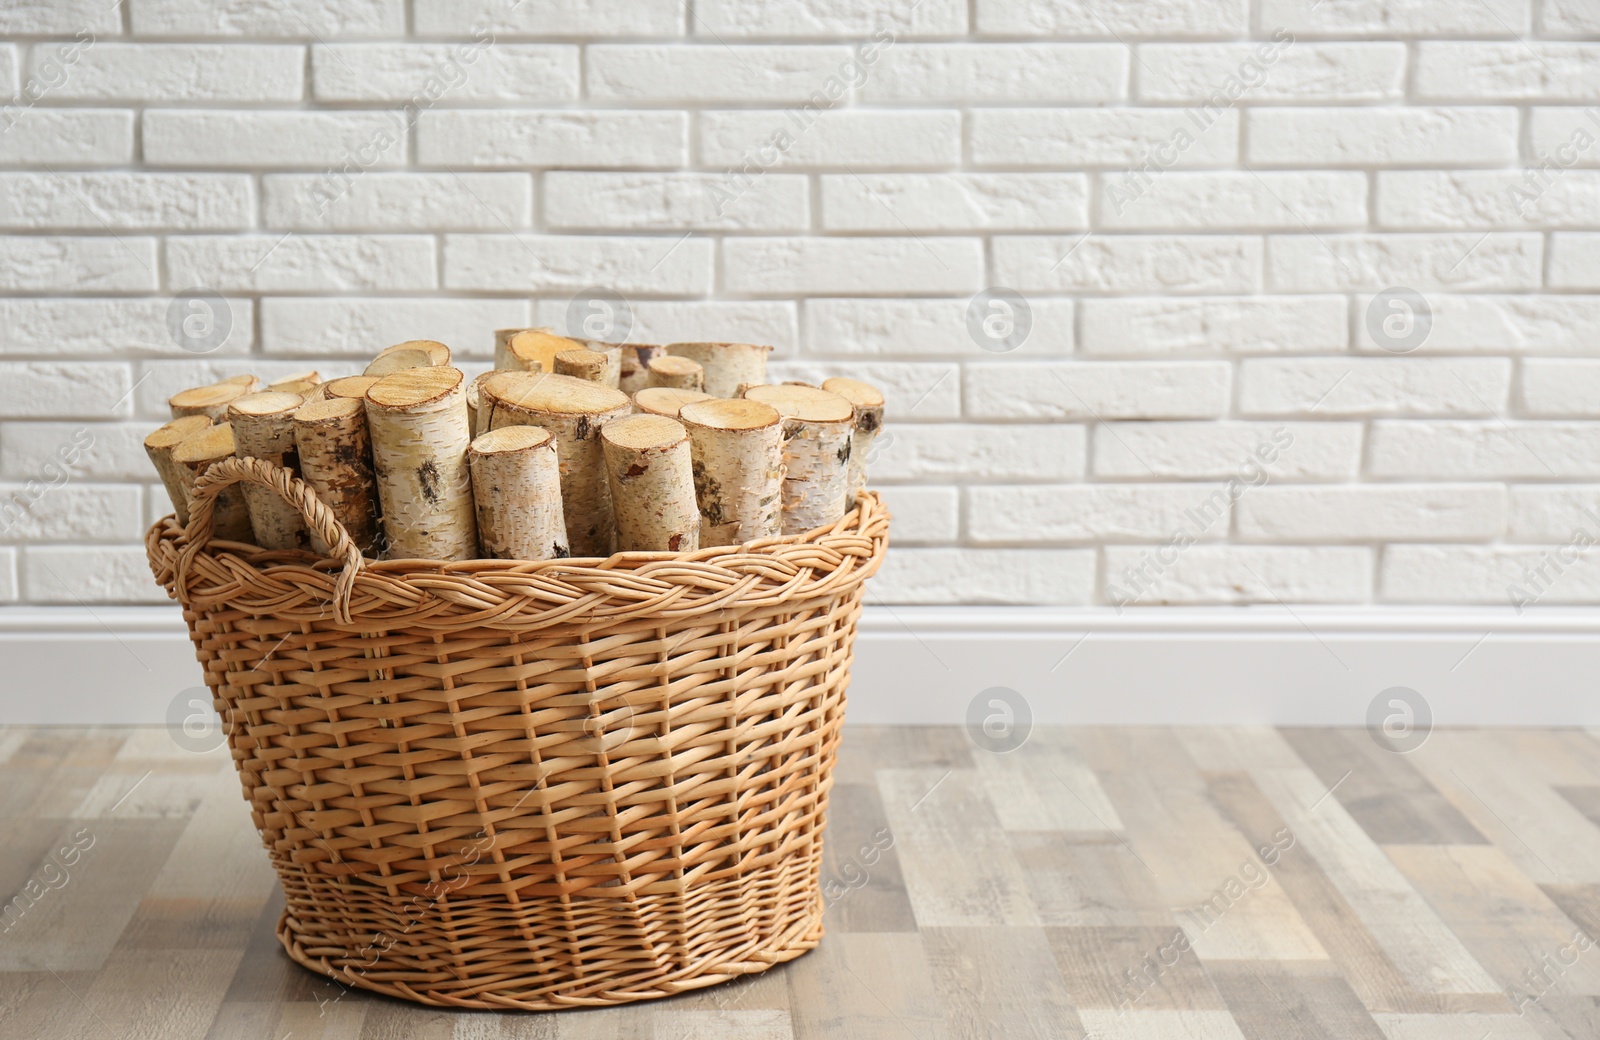 Photo of Wicker basket with firewood near white brick wall indoors, space for text